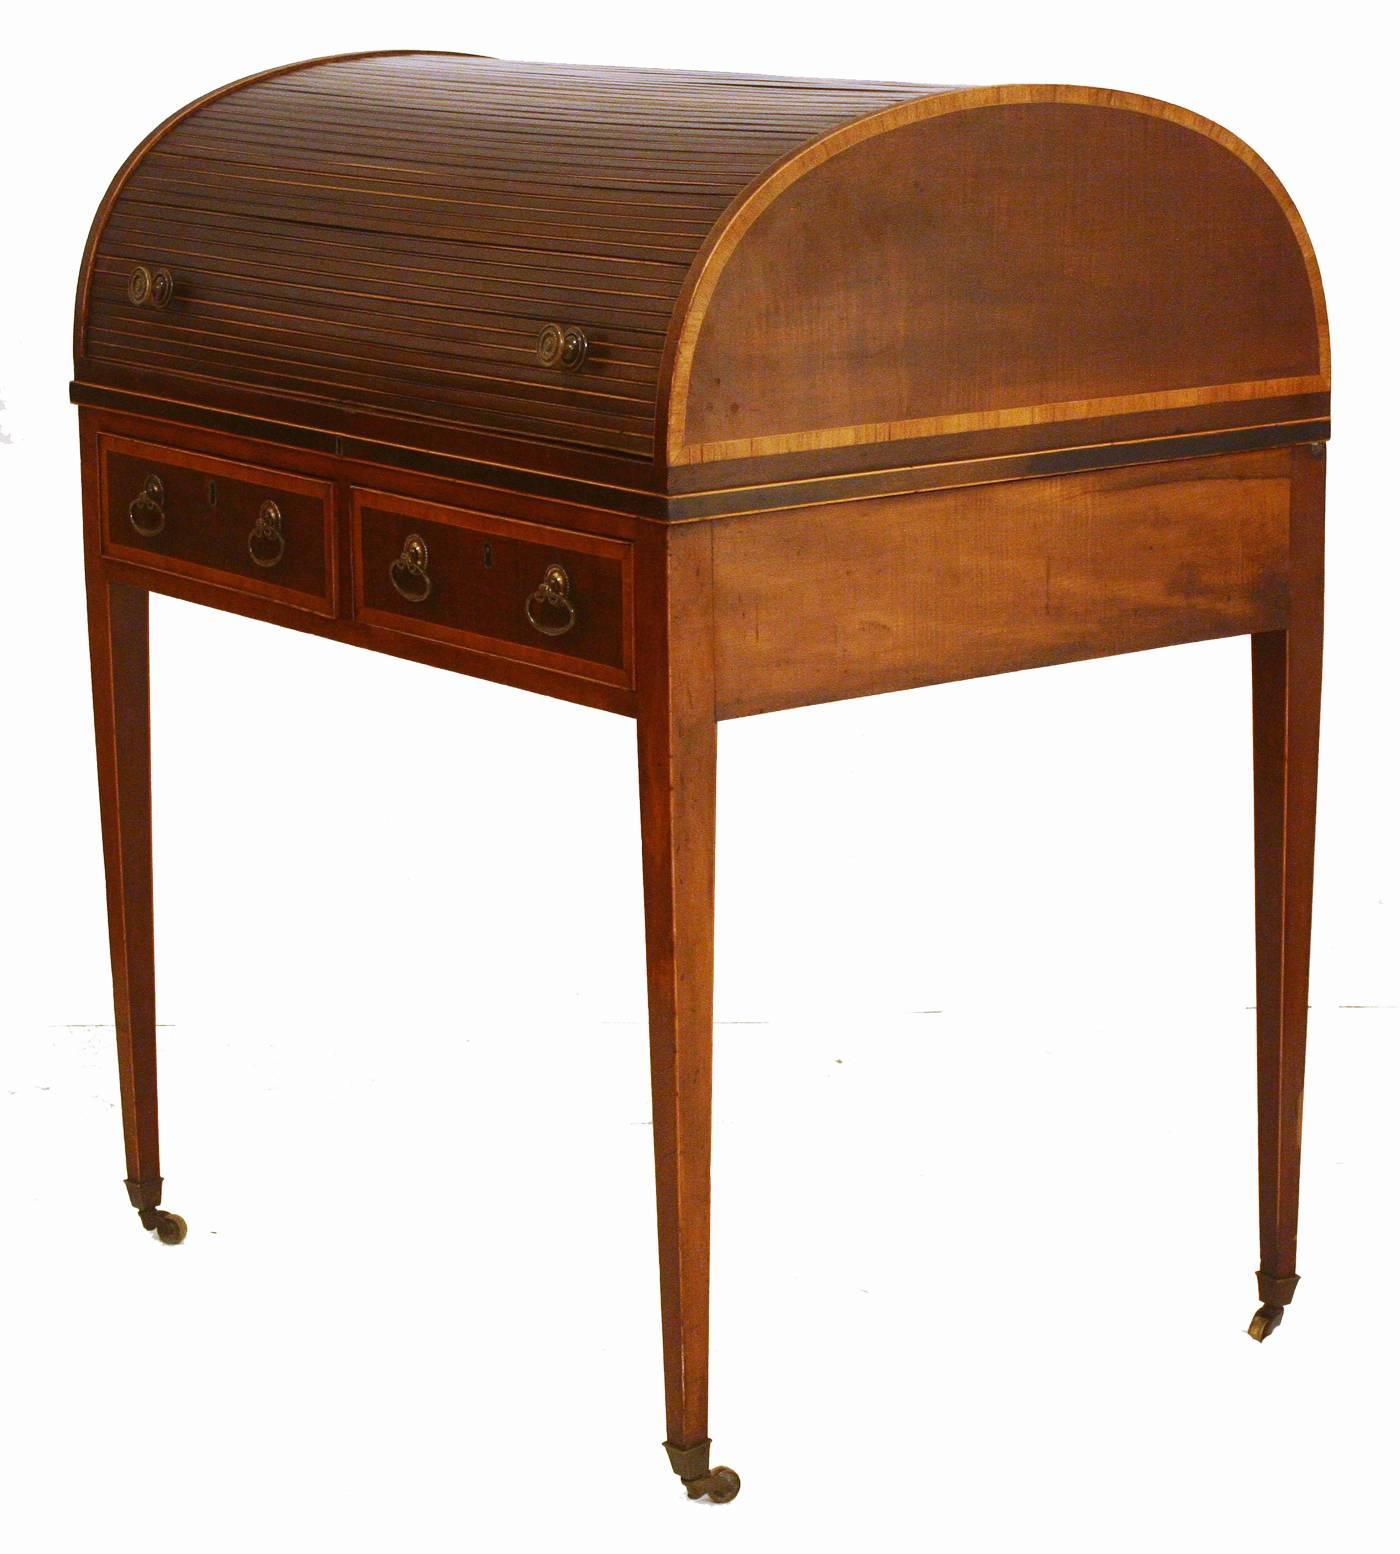 A small George III roll top desk with tambour front. Mahogany with satinwood inlay around drawers and sides. Interior has cubbyholes. Two small drawers and straight legs on casters.